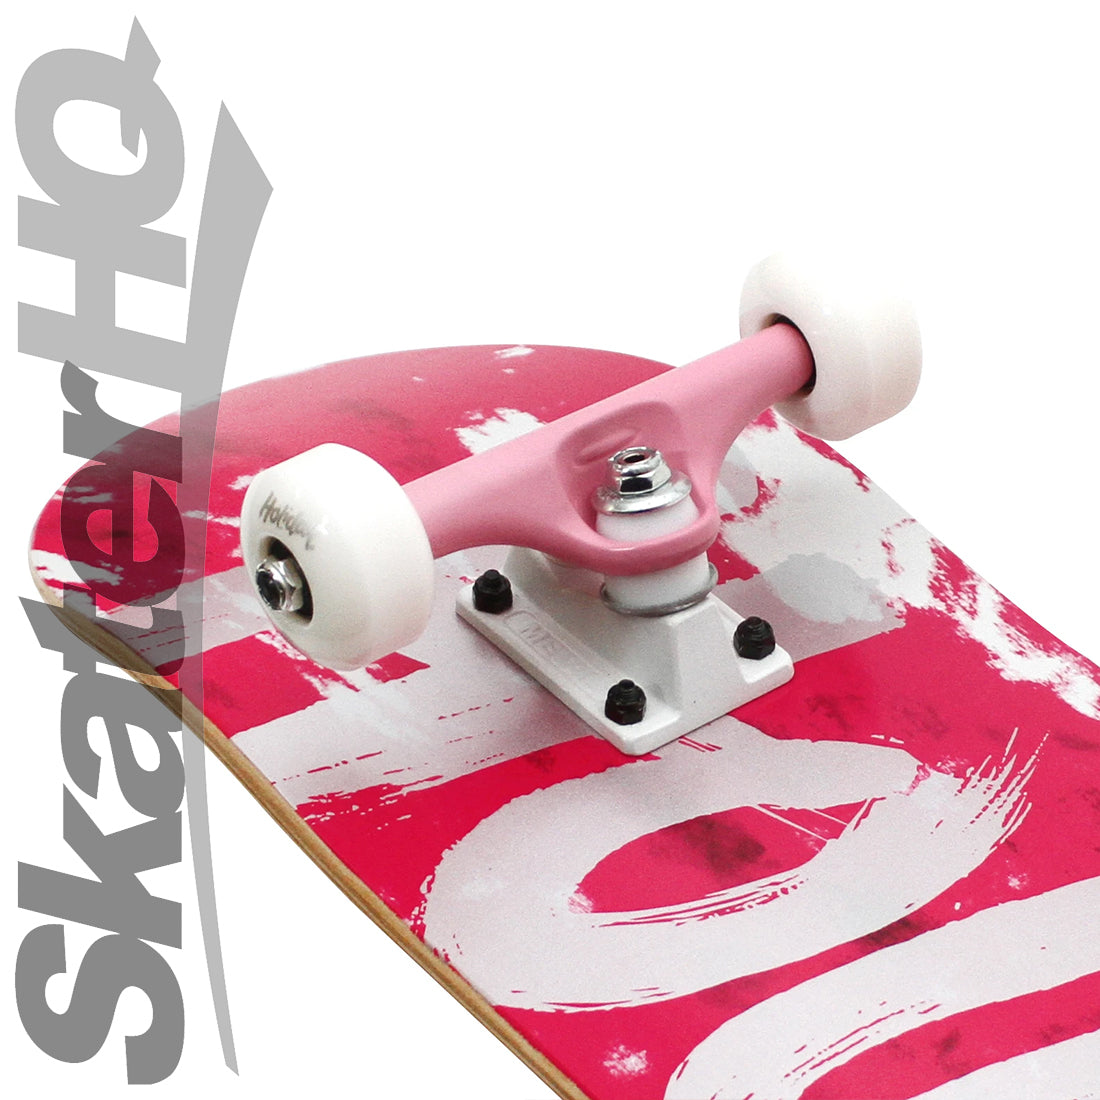 Holiday Tie Dye 7.75 Complete - Pink/Silver Skateboard Completes Modern Street